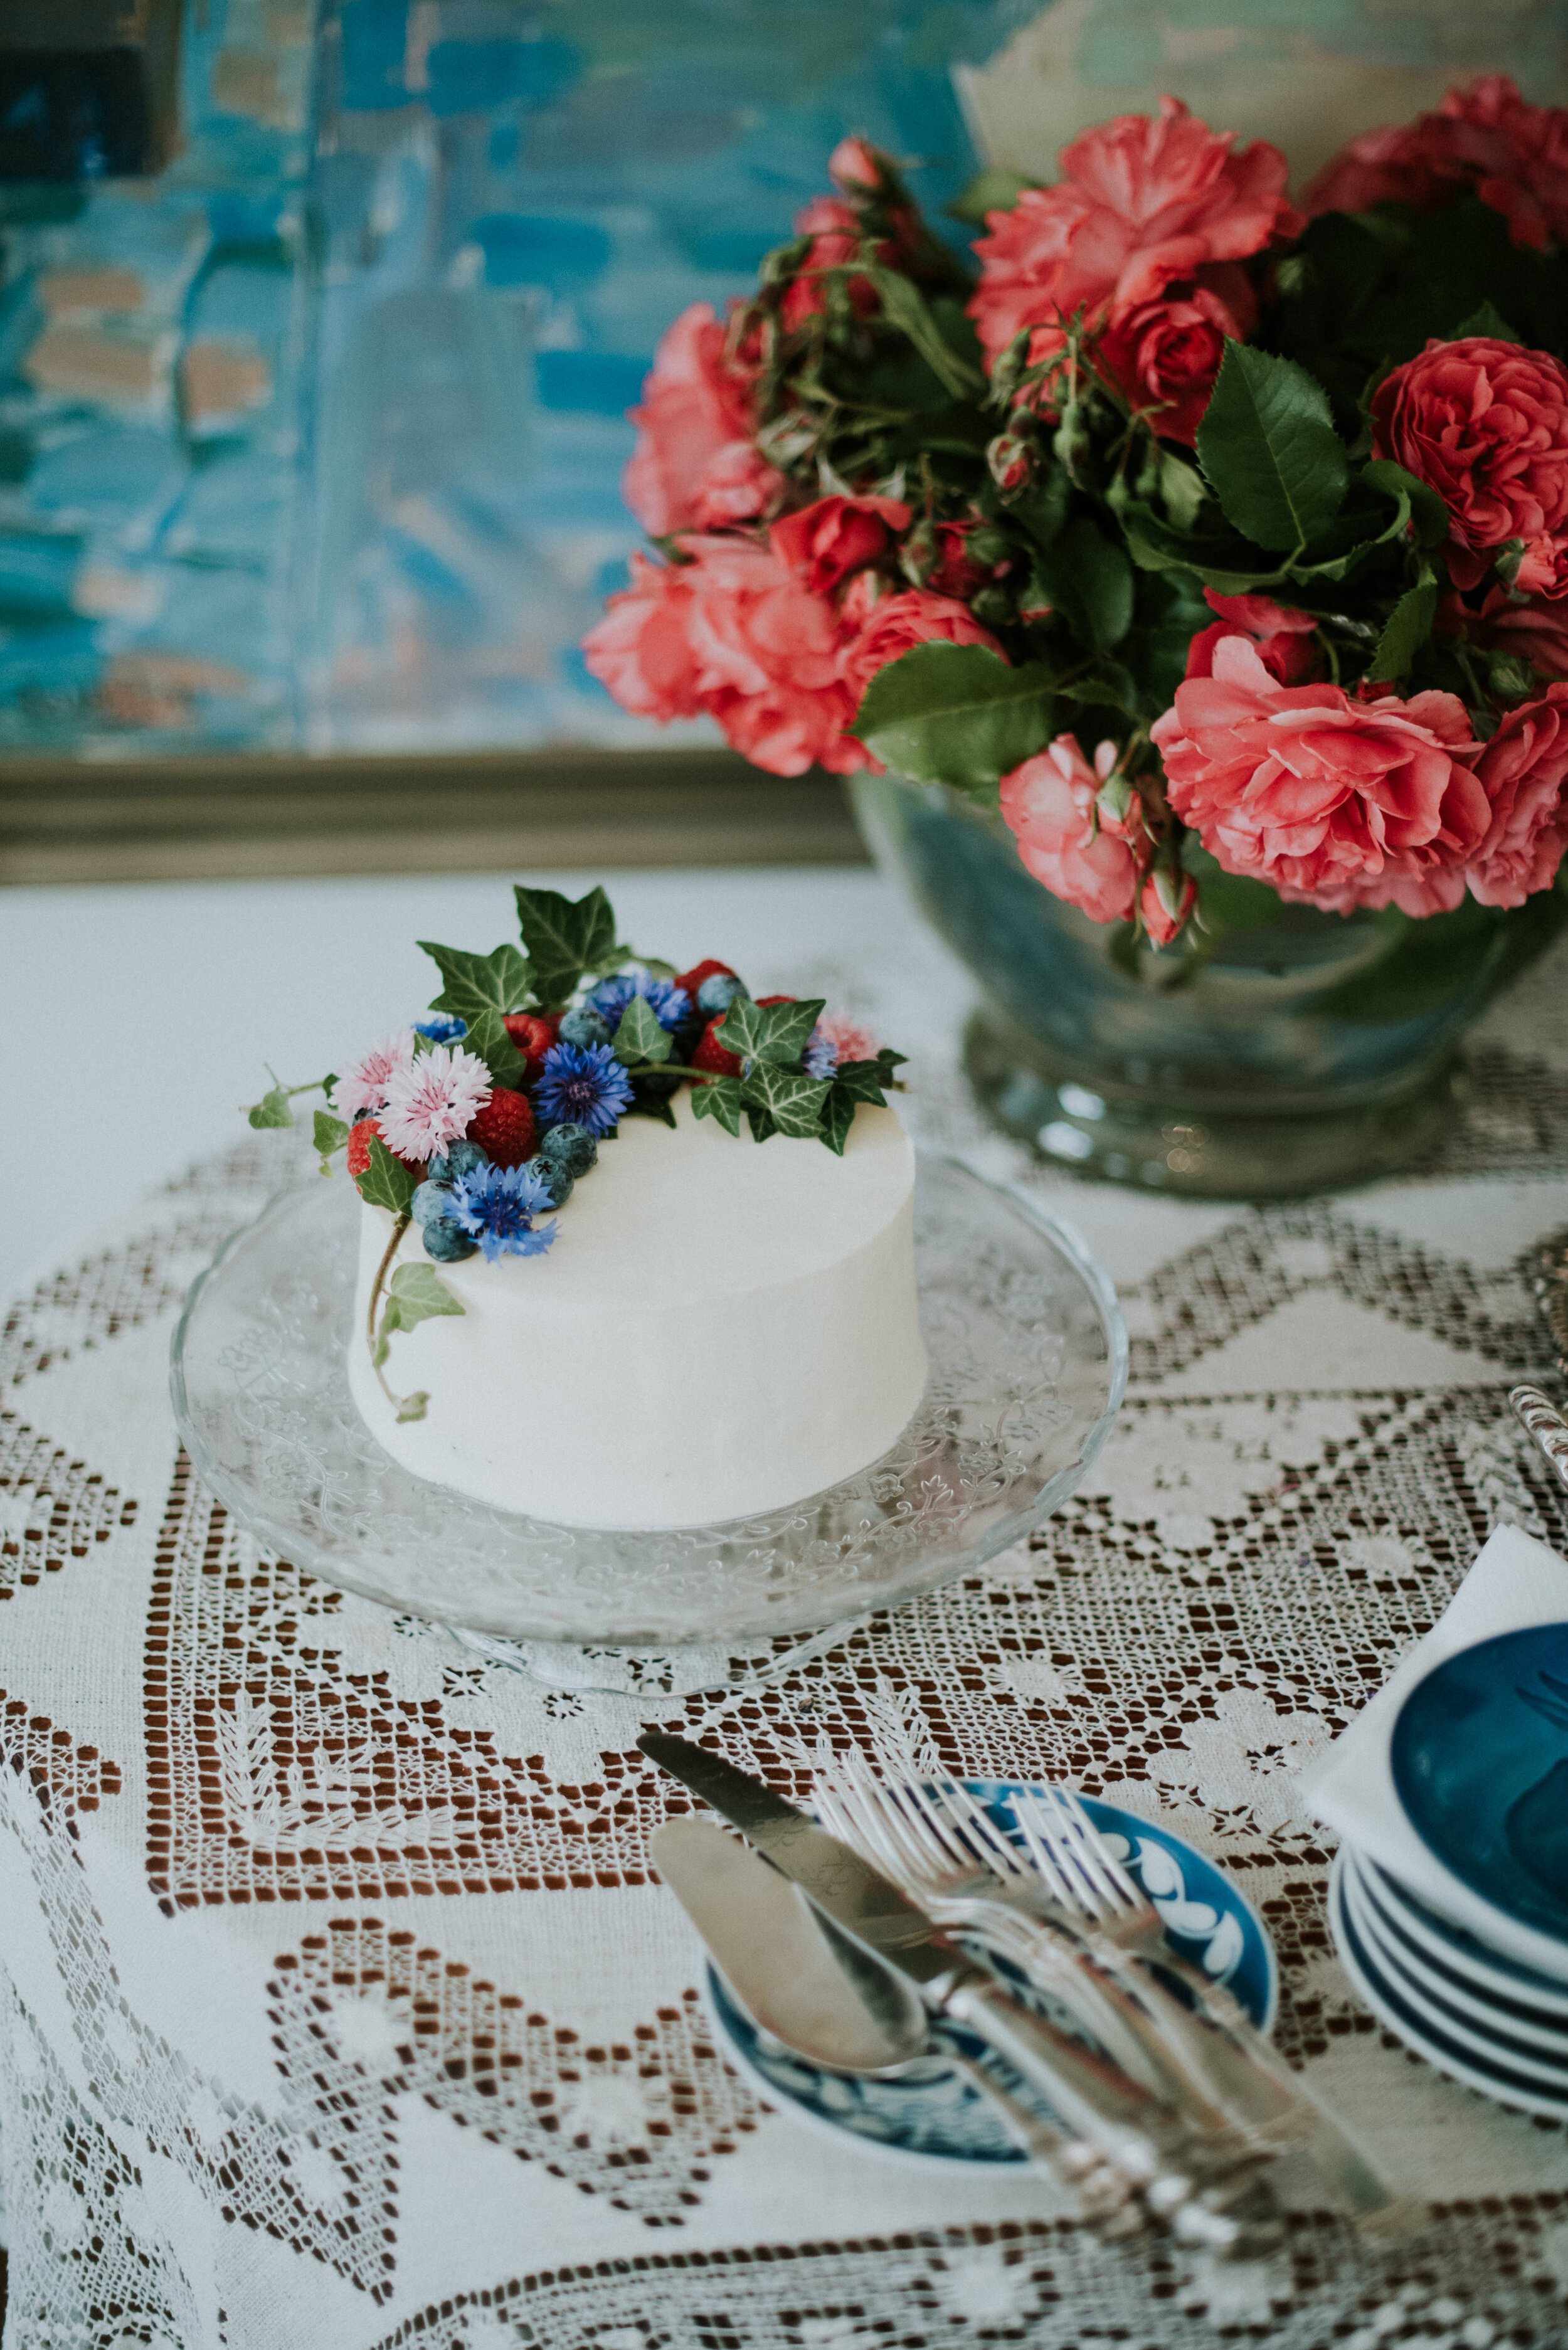 Artisan wedding cake with flowers | full-service destination wedding | get married in Denmark | Aero Island | Danish Island Weddings | Denmark wedding planners and venue